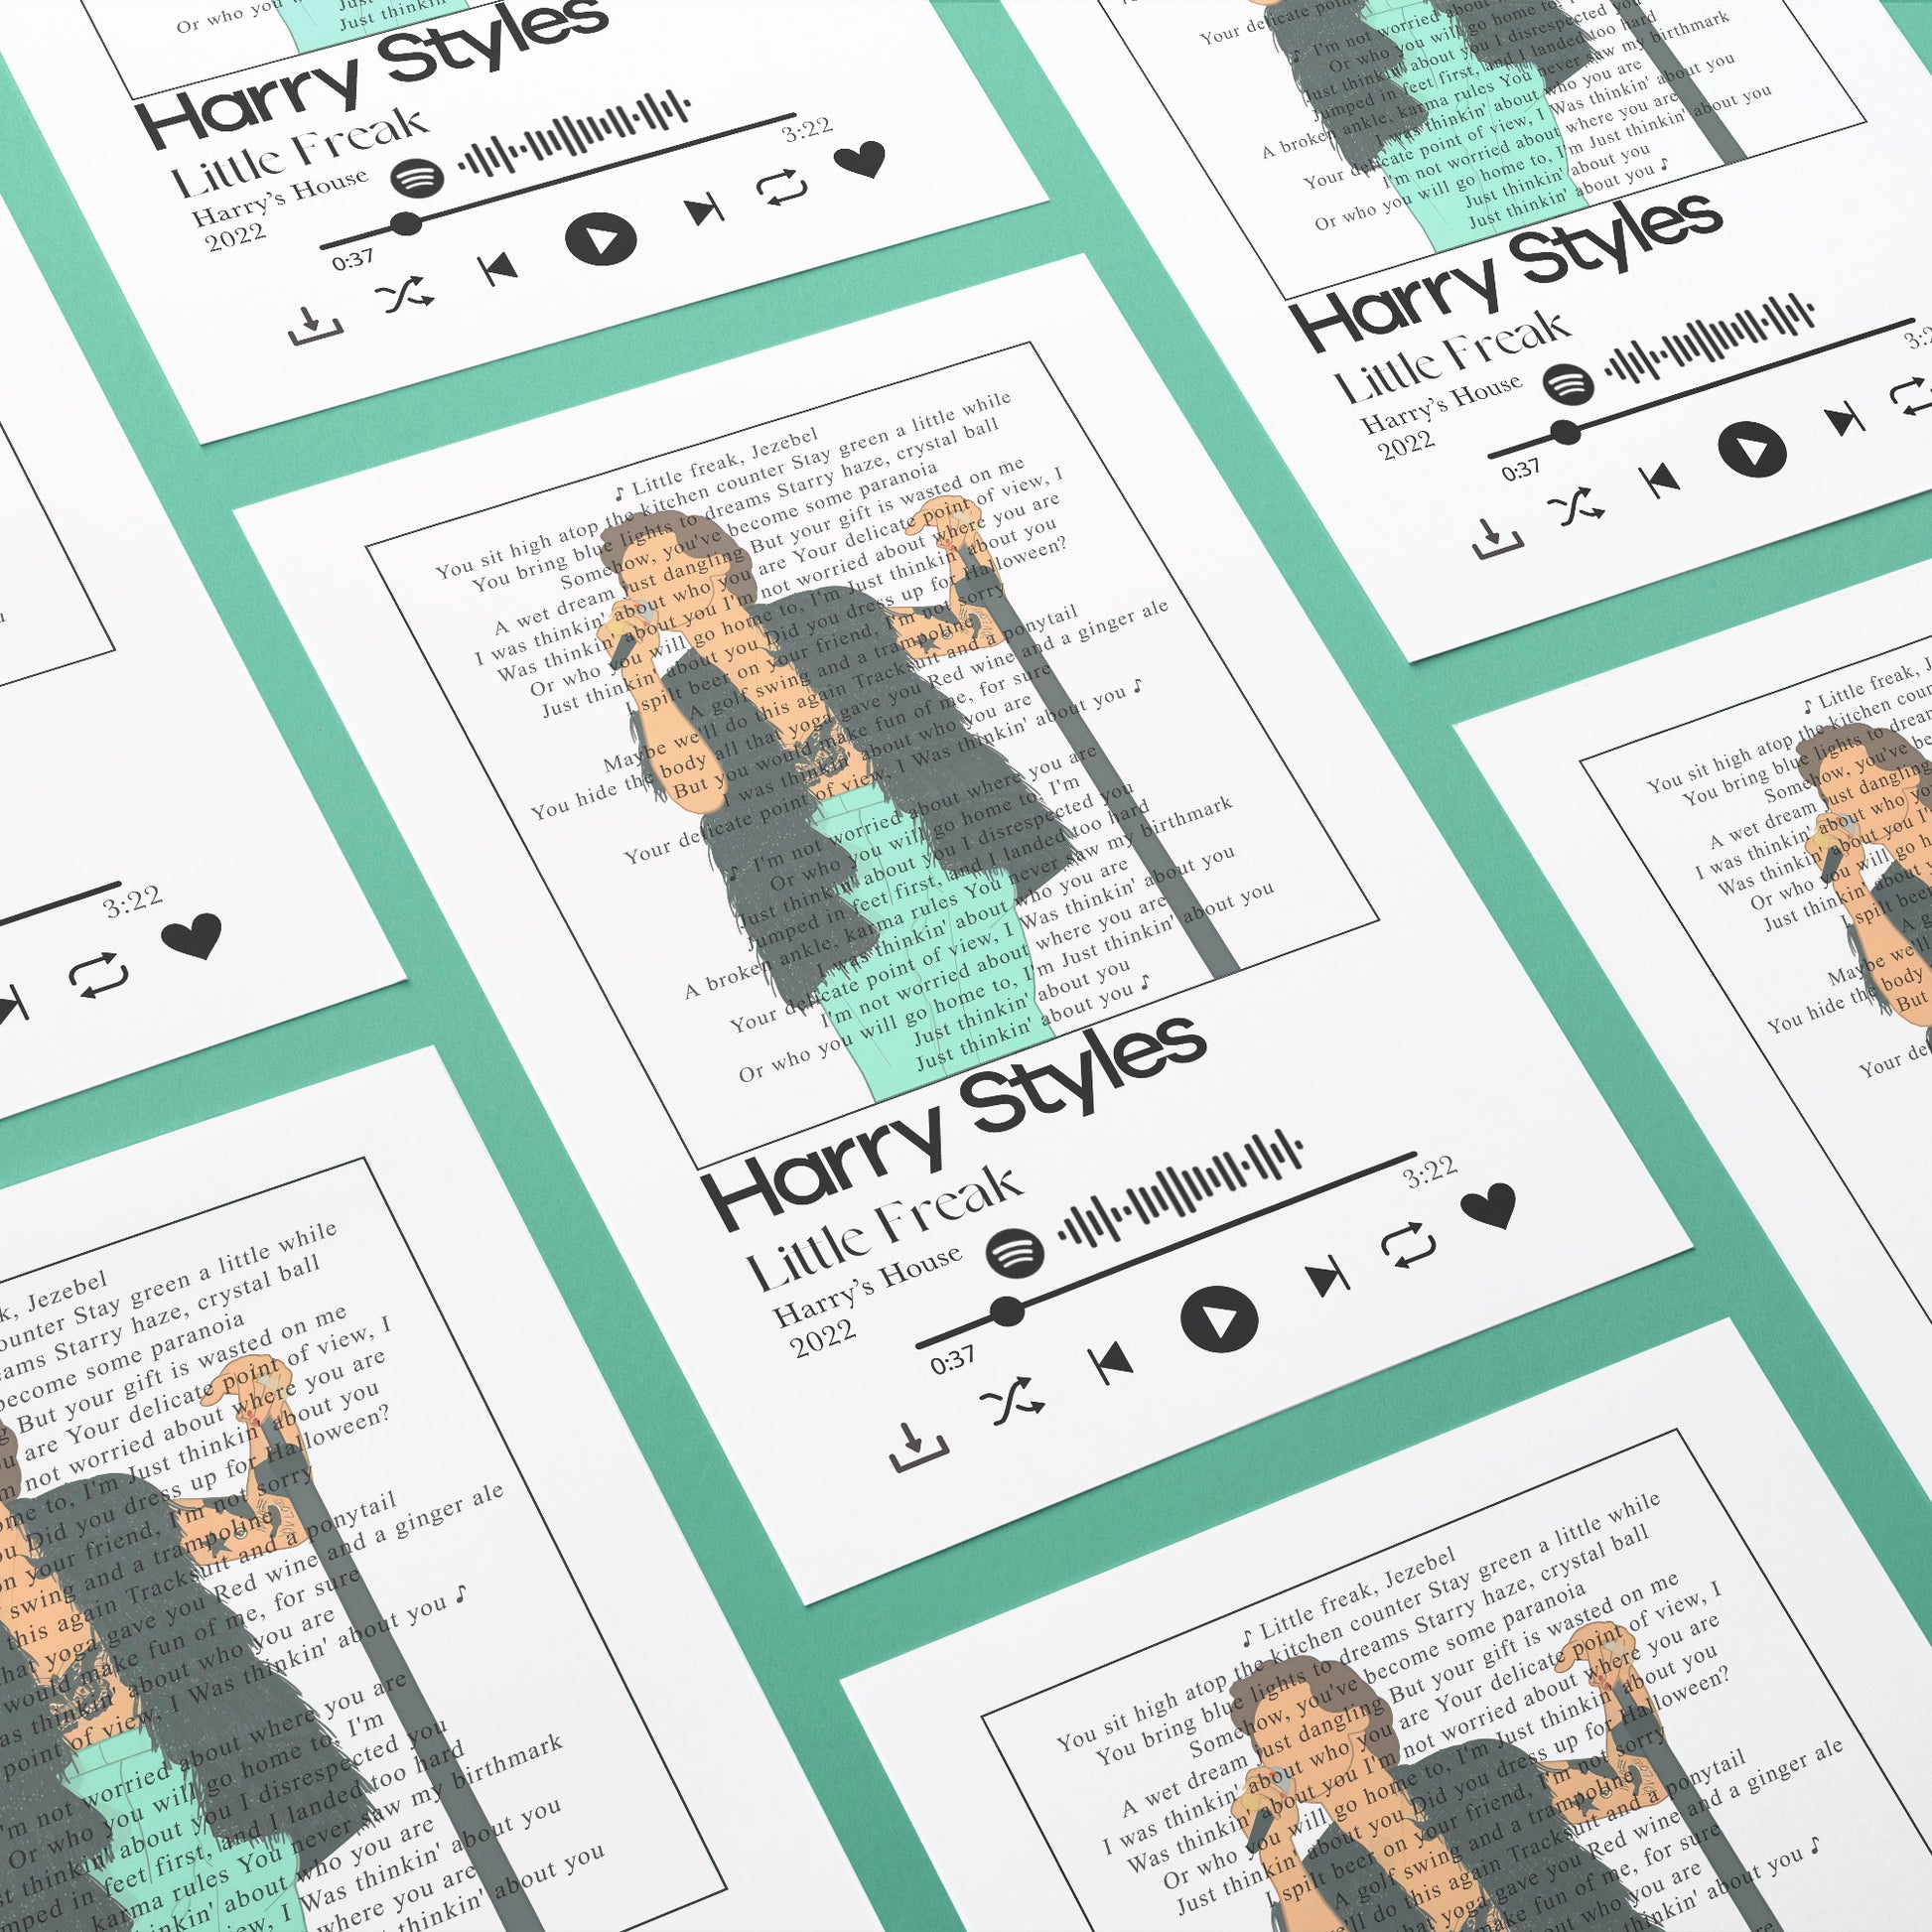 Enliven your home or office walls with Harry Styles' peppy lyric prints, featuring your favourite Spotify songs! With this fun personalised twist, you can add a unique flair and spunk to your space - it's like having your own little jam session!